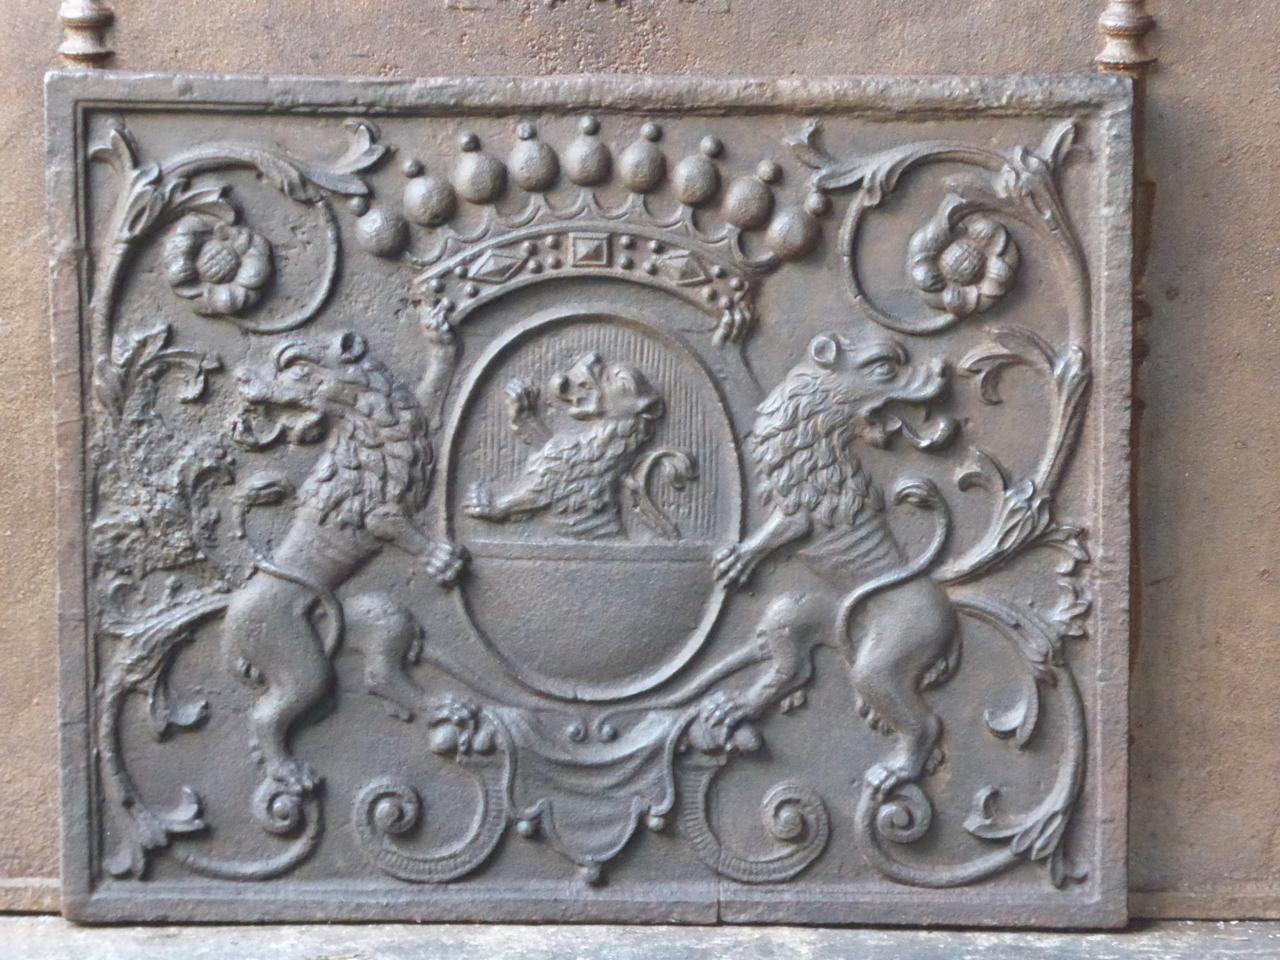 Fireback with the coat of arms of the Eltz Family who owned the foundry of Ottange, close to Longwy, Lorraine, France. Described by P. Palasi ('Plaques de cheminées héraldiques'; item 575).

The fireback is made of cast iron and has a natural brown